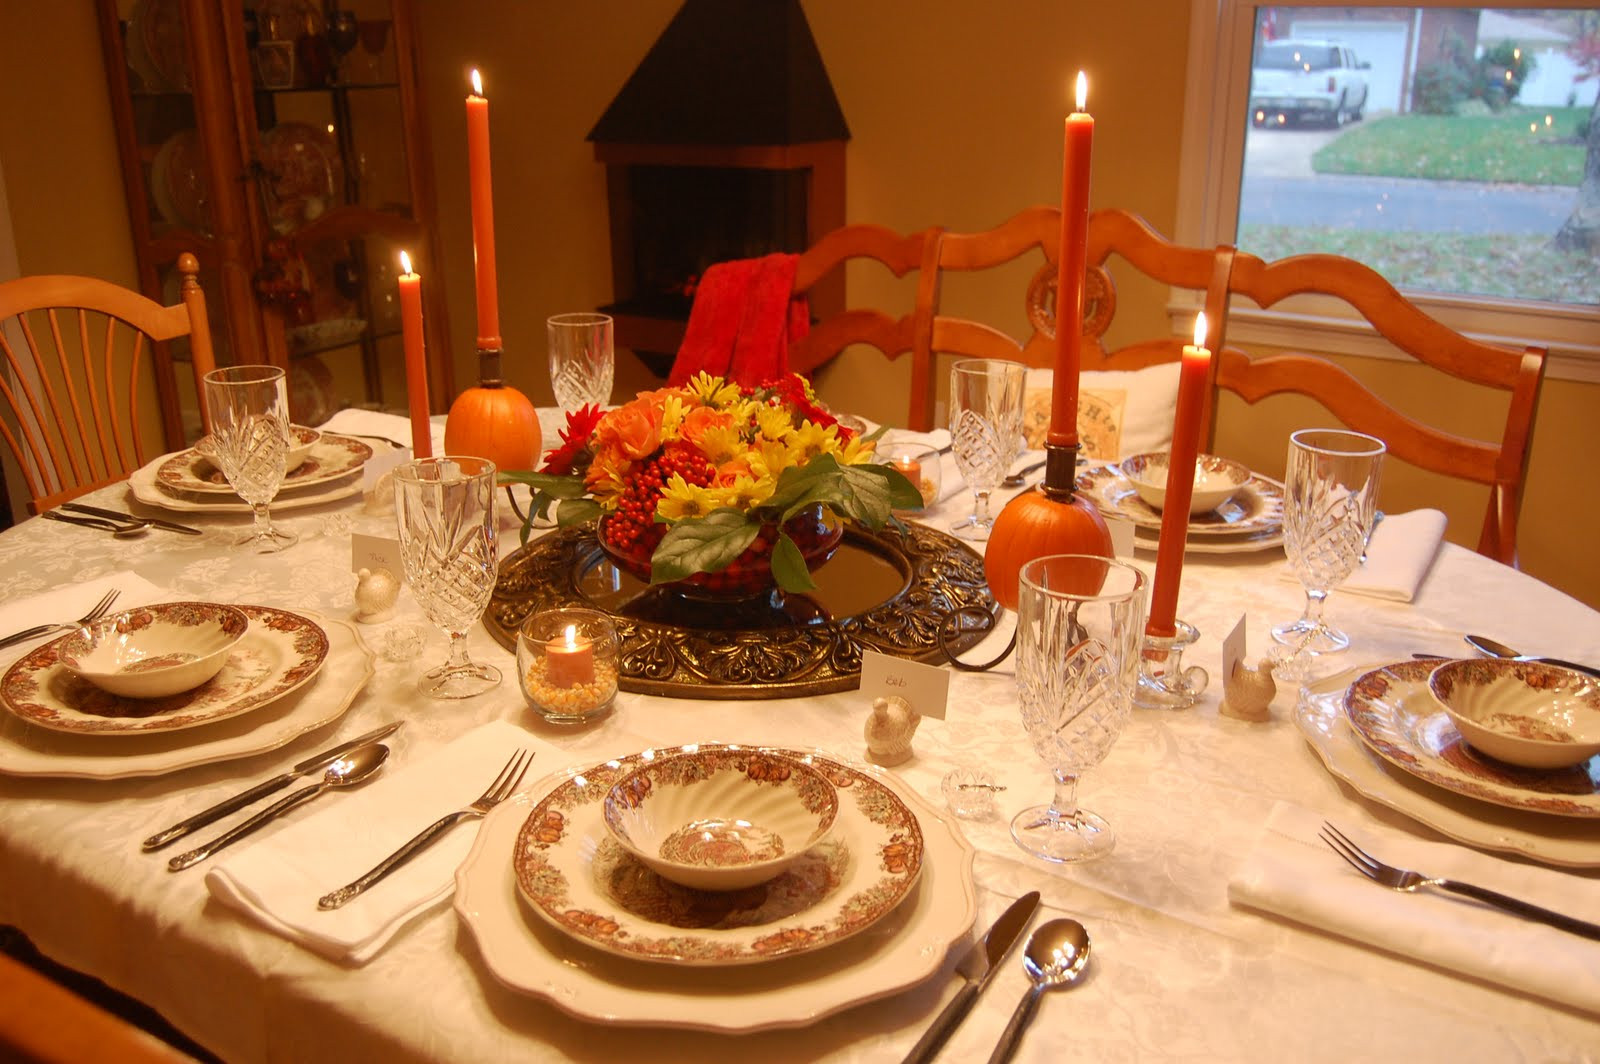 Thanksgiving Dinner Table Decorations
 The Knife is Always Right How to Set the Perfect